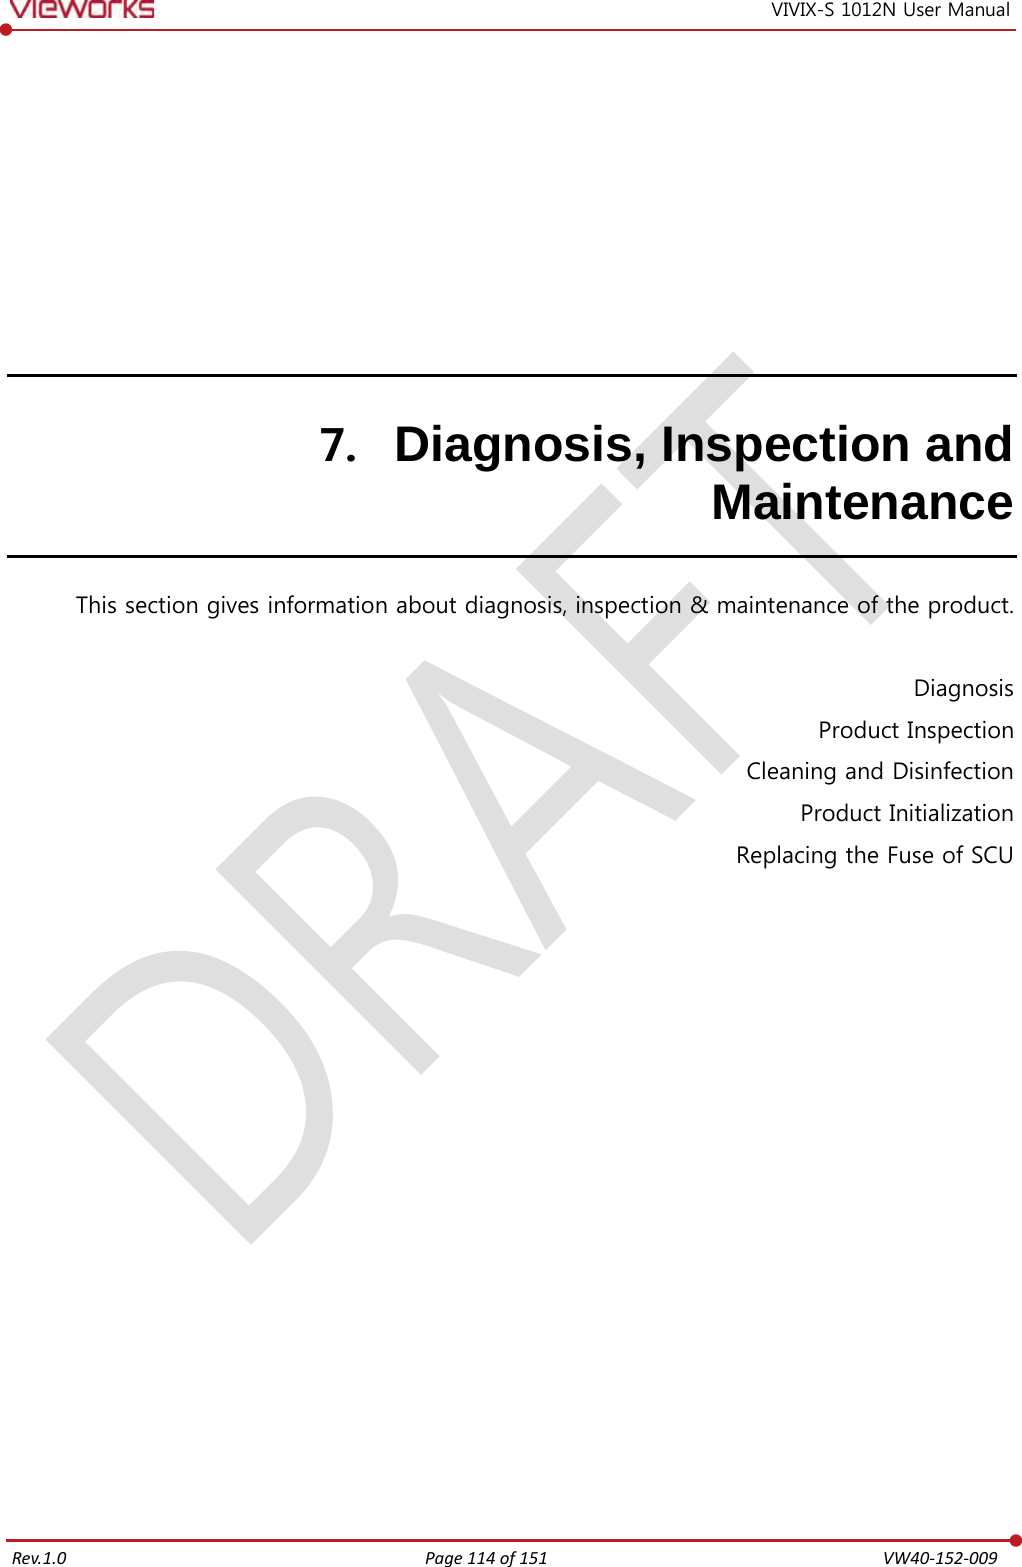   Rev.1.0 Page 114 of 151  VW40-152-009 VIVIX-S 1012N User Manual 7. Diagnosis, Inspection and Maintenance This section gives information about diagnosis, inspection &amp; maintenance of the product.  Diagnosis Product Inspection Cleaning and Disinfection Product Initialization Replacing the Fuse of SCU   